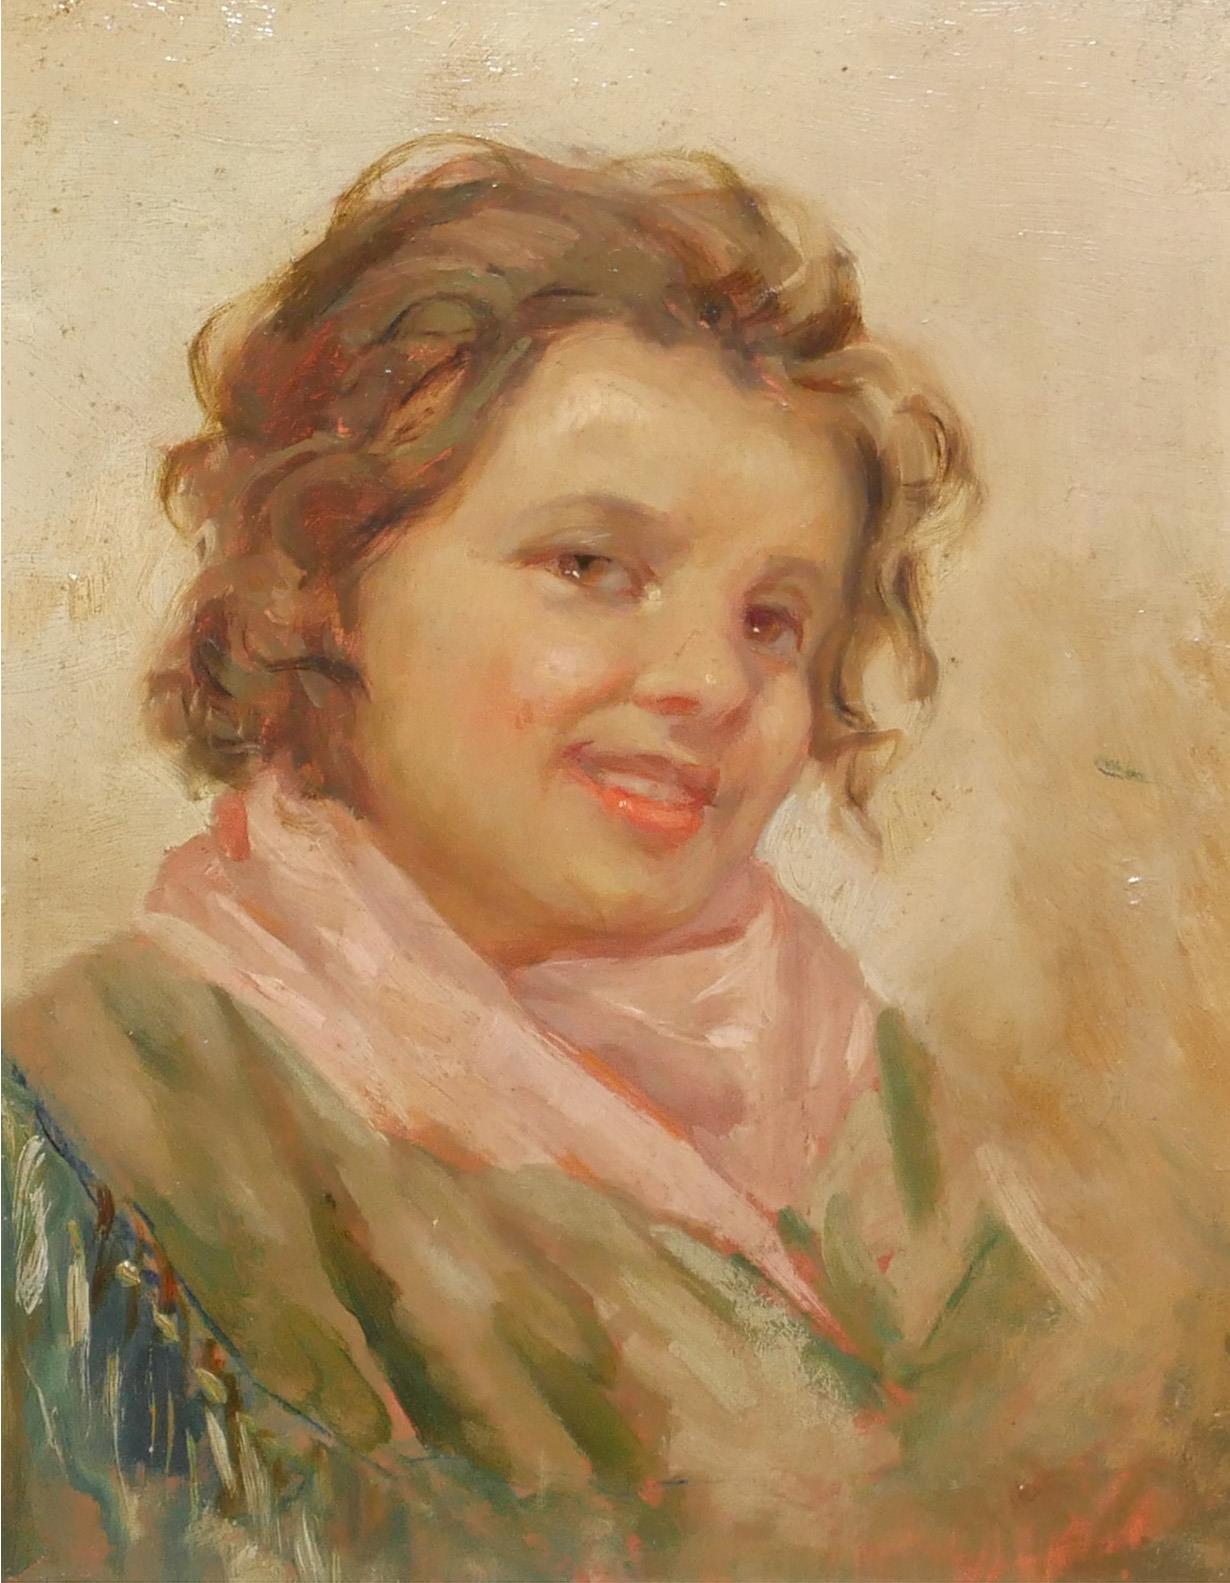 UNKNOWN ARTIST (XX), OIL ON CANVAS, AN EARLY 20TH CENTURY CONTINENTAL PORTRAIT OF A SMILING